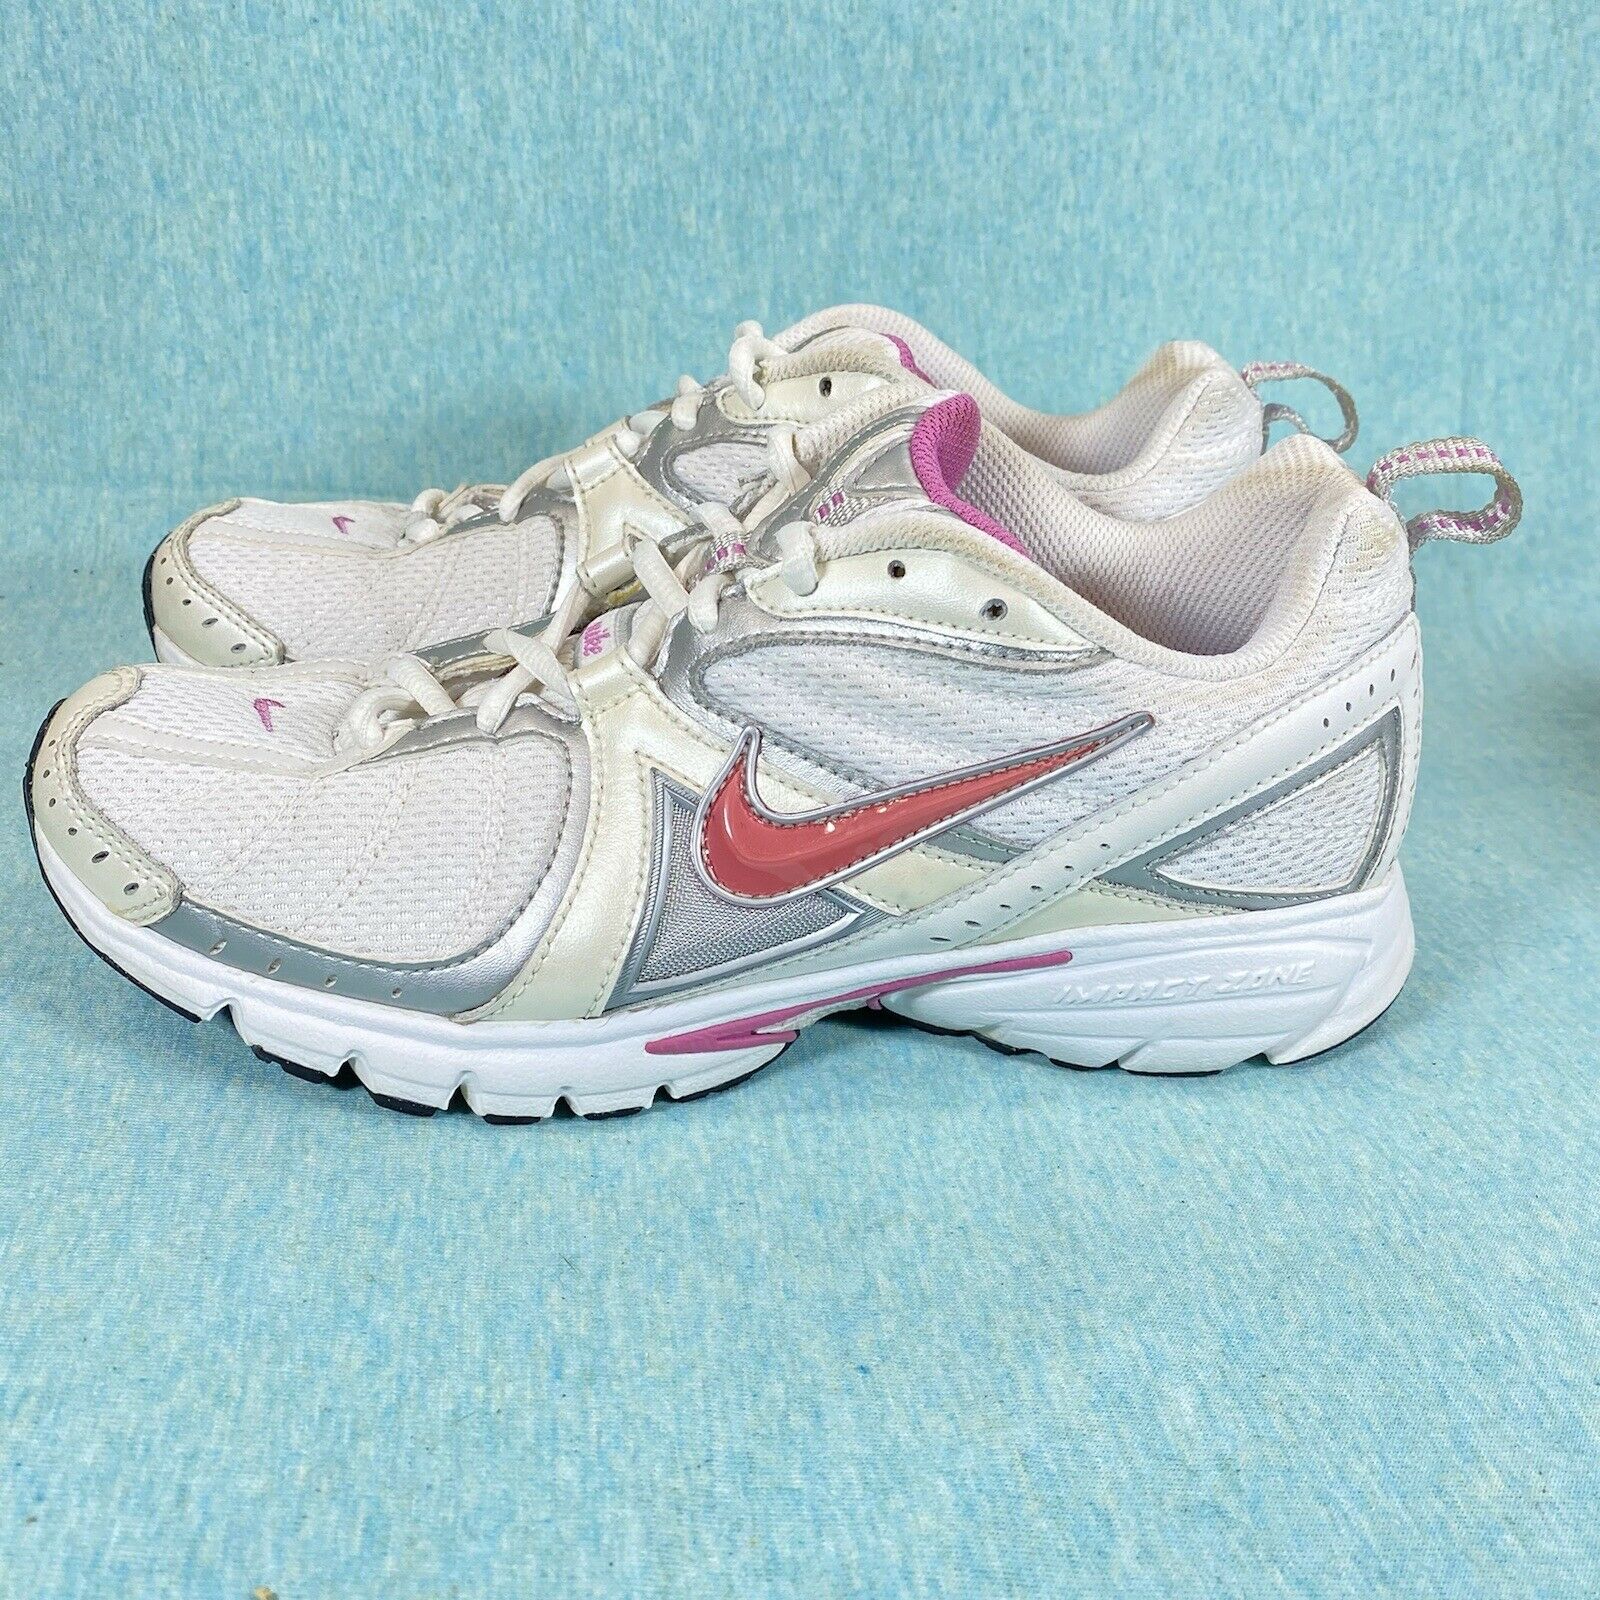 Nike Shoes Impact Zone Womens Size 8.5 Gray/Rose/white Athletic Comfort Sneakers